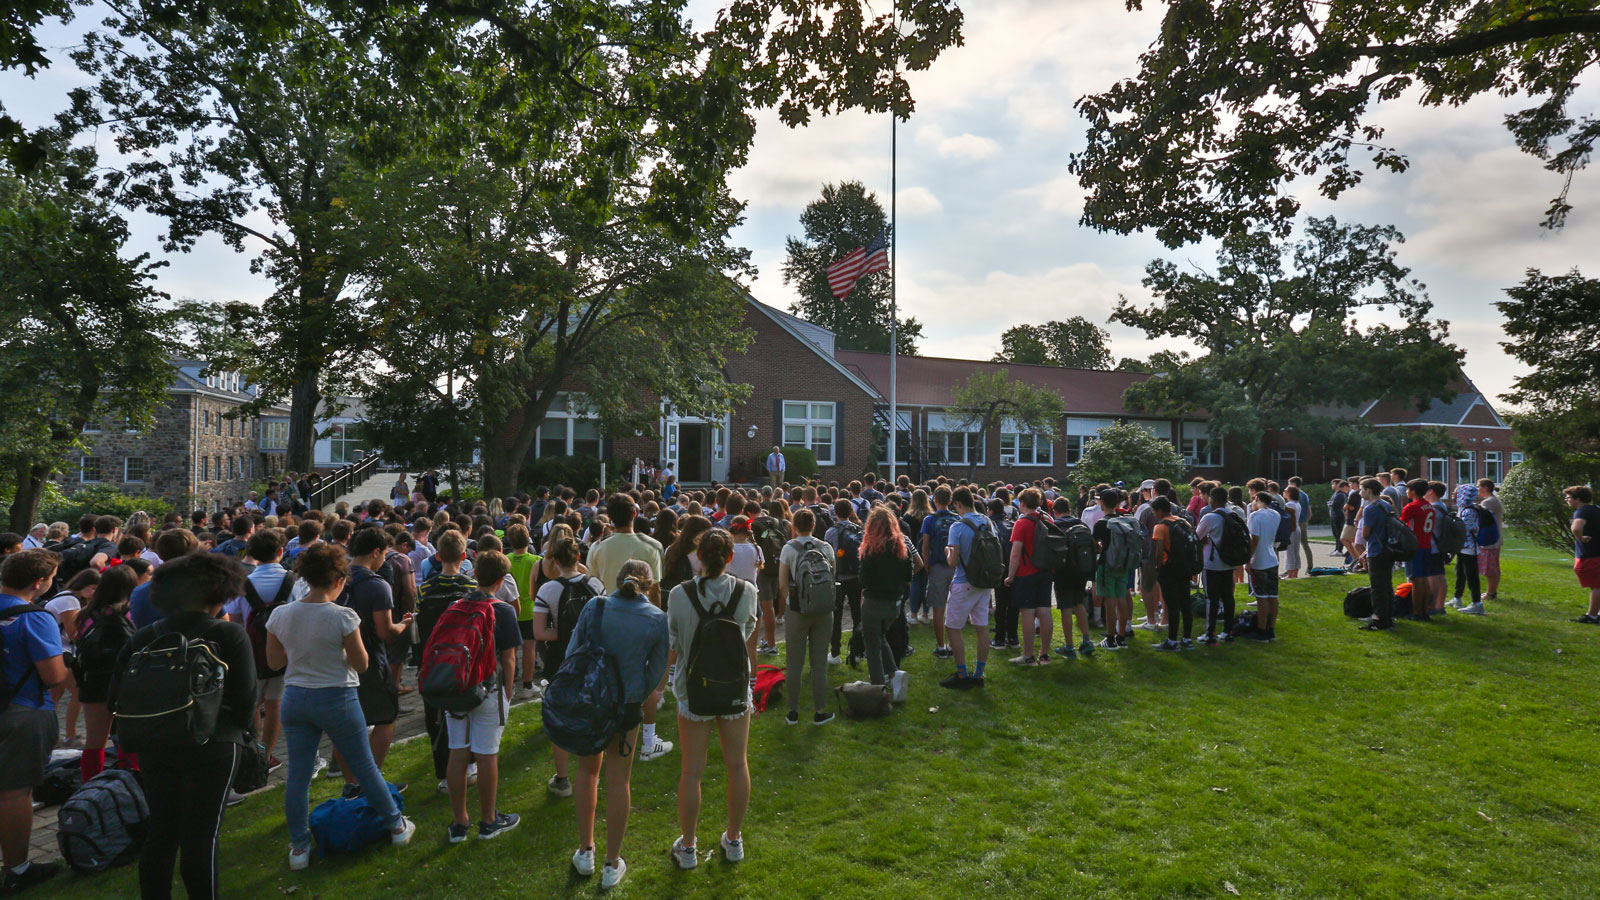 A student-organized gathering this year to commemorate the events of Sept. 11, 2001.